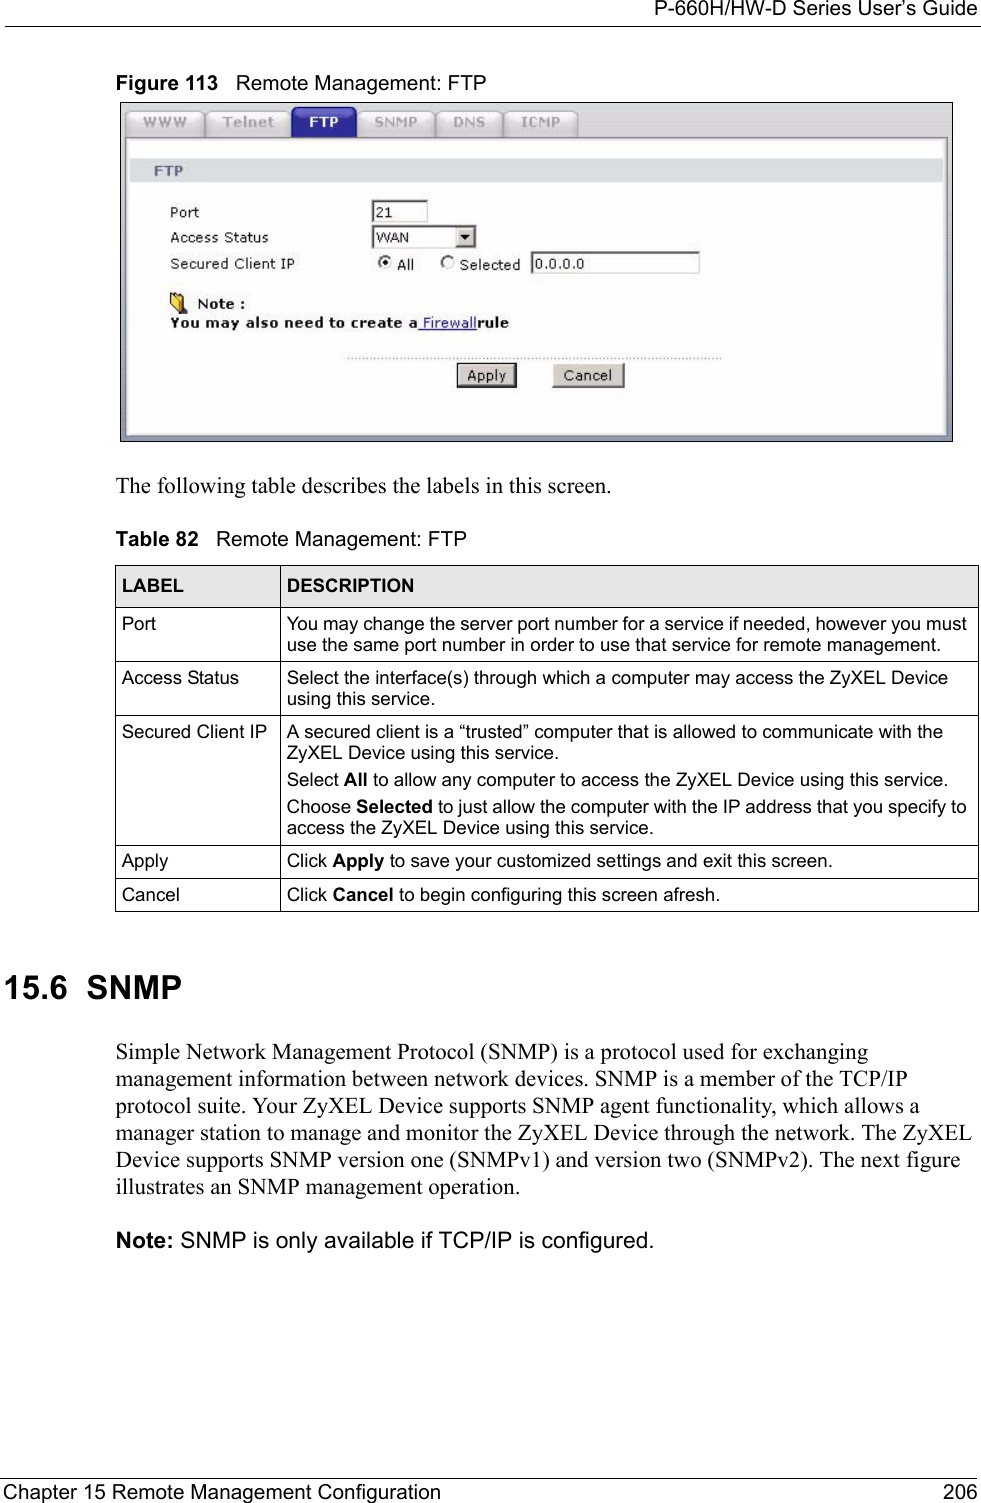 P-660H/HW-D Series User’s GuideChapter 15 Remote Management Configuration 206Figure 113   Remote Management: FTPThe following table describes the labels in this screen.15.6  SNMPSimple Network Management Protocol (SNMP) is a protocol used for exchanging management information between network devices. SNMP is a member of the TCP/IP protocol suite. Your ZyXEL Device supports SNMP agent functionality, which allows a manager station to manage and monitor the ZyXEL Device through the network. The ZyXEL Device supports SNMP version one (SNMPv1) and version two (SNMPv2). The next figure illustrates an SNMP management operation.Note: SNMP is only available if TCP/IP is configured.Table 82   Remote Management: FTPLABEL DESCRIPTIONPort You may change the server port number for a service if needed, however you must use the same port number in order to use that service for remote management.Access Status Select the interface(s) through which a computer may access the ZyXEL Device using this service.Secured Client IP A secured client is a “trusted” computer that is allowed to communicate with the ZyXEL Device using this service. Select All to allow any computer to access the ZyXEL Device using this service.Choose Selected to just allow the computer with the IP address that you specify to access the ZyXEL Device using this service.Apply Click Apply to save your customized settings and exit this screen. Cancel Click Cancel to begin configuring this screen afresh.